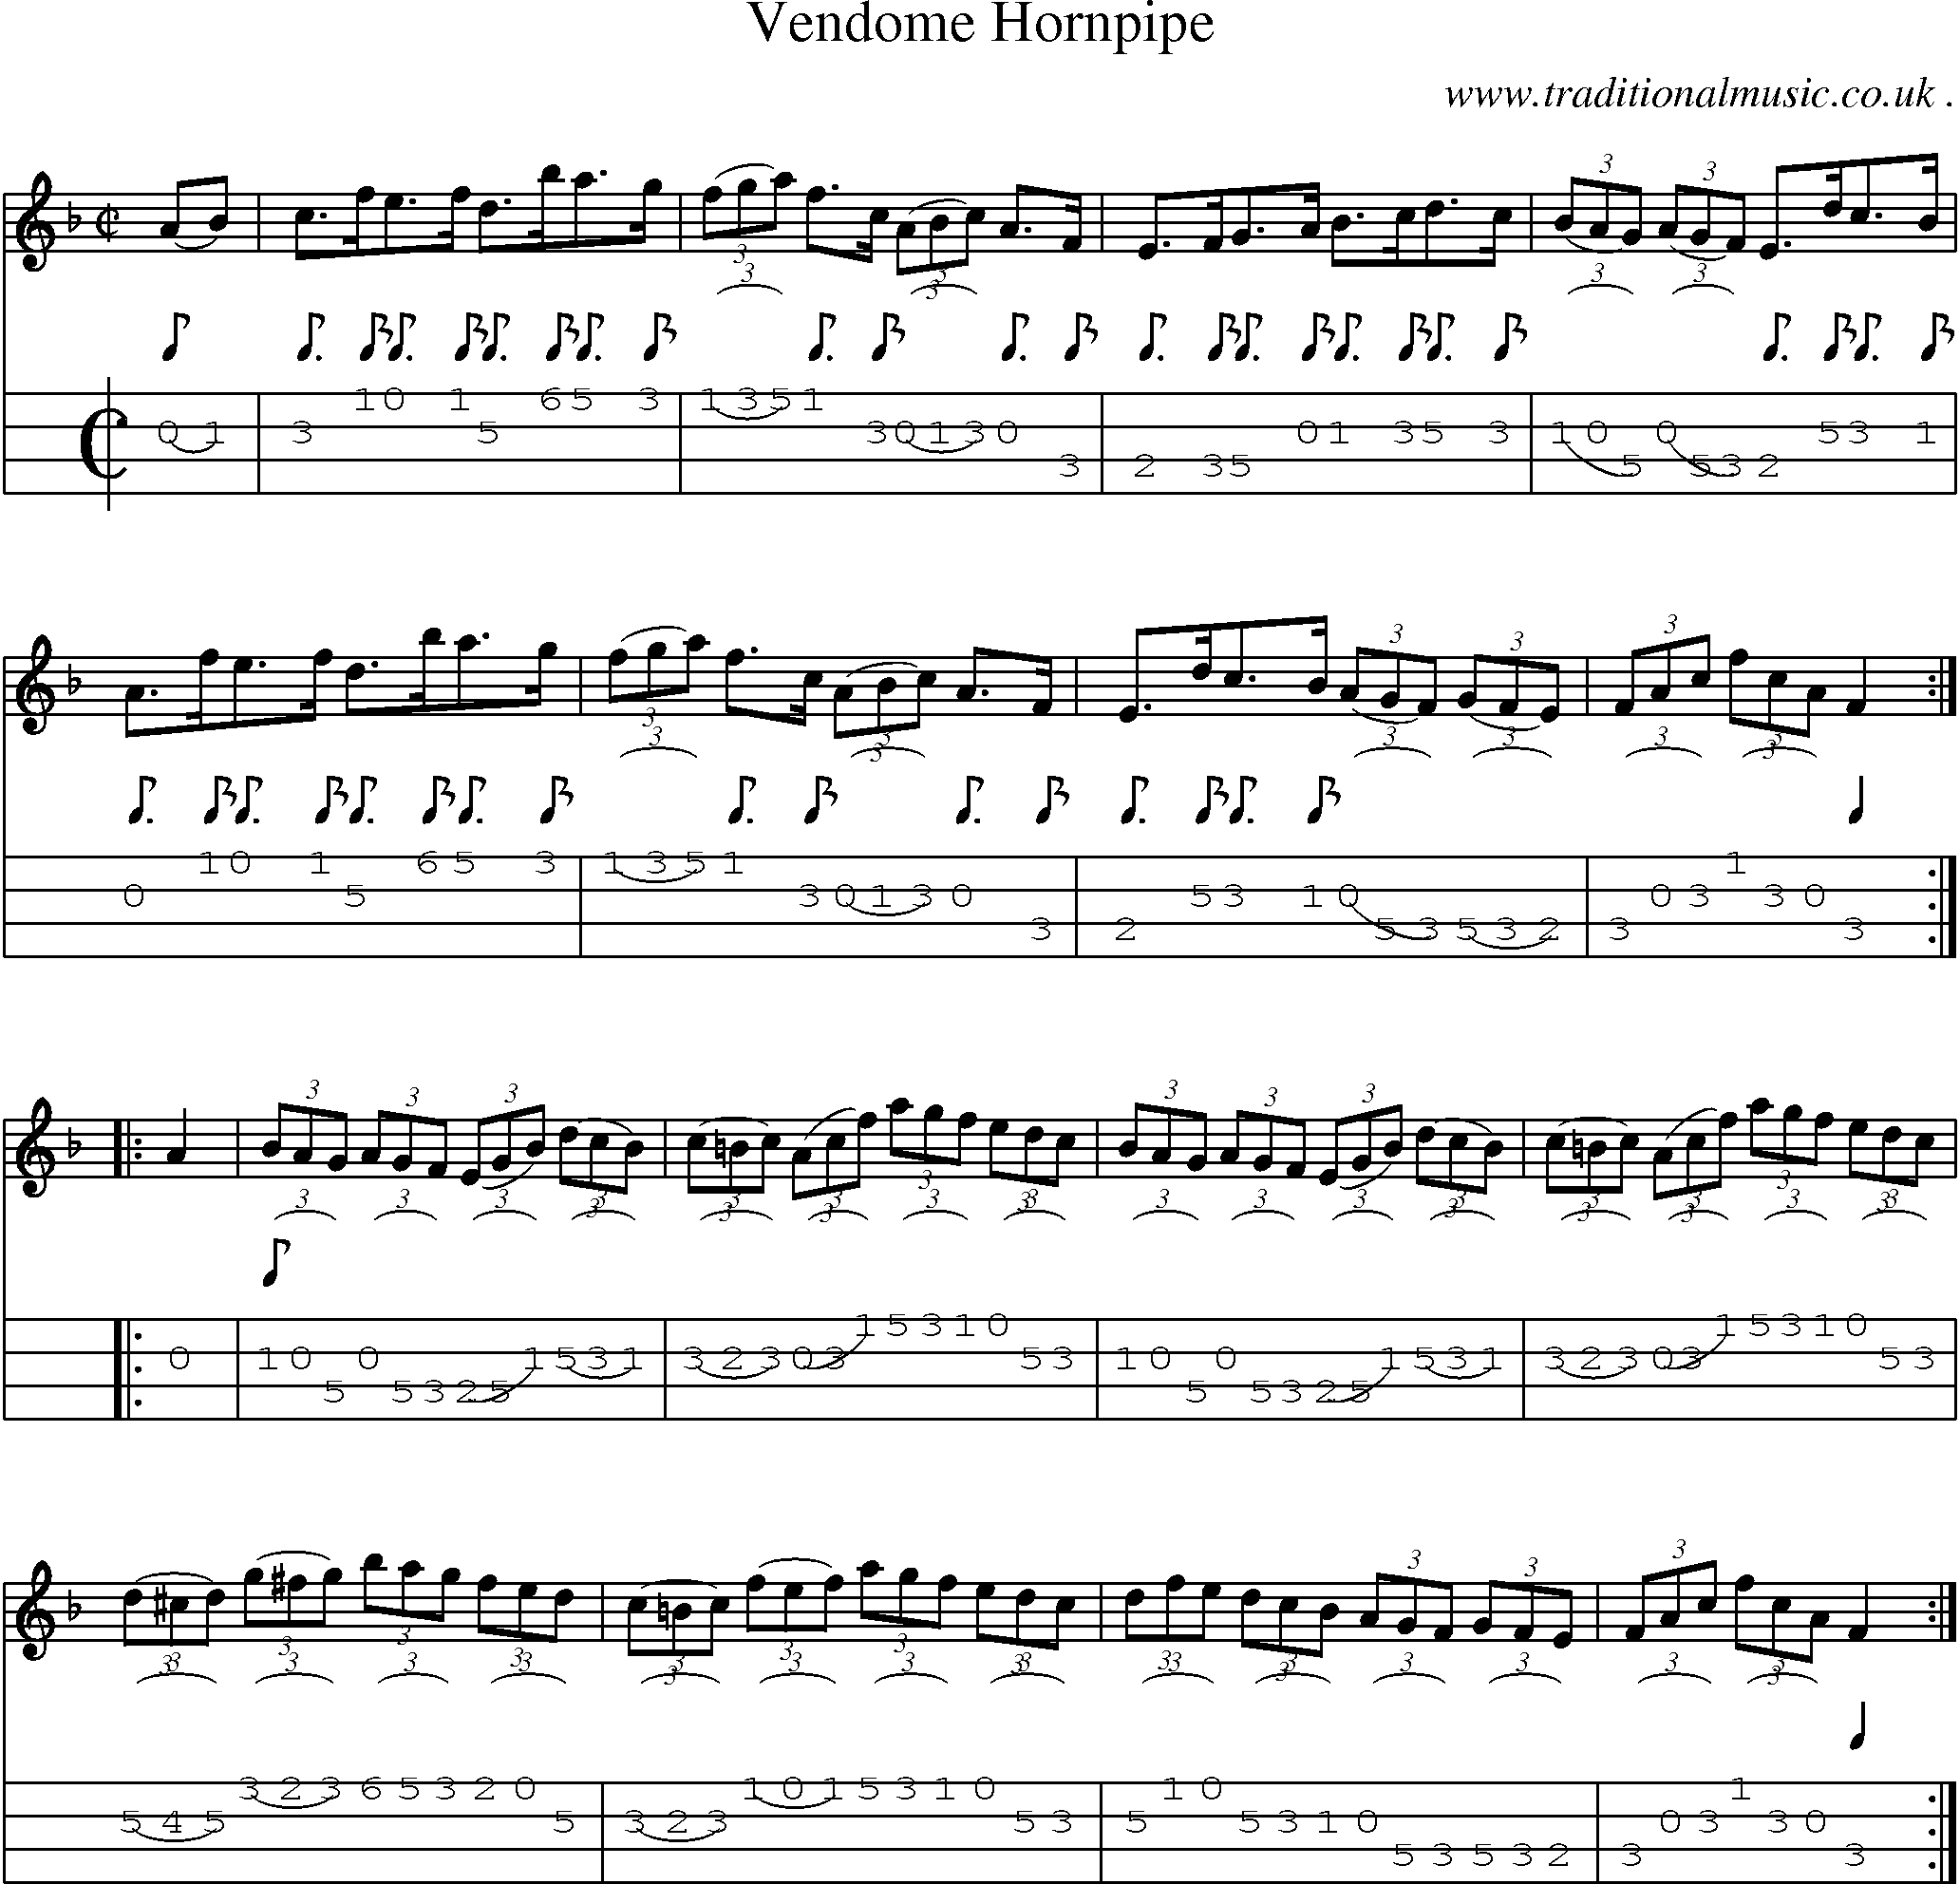 Sheet-Music and Mandolin Tabs for Vendome Hornpipe